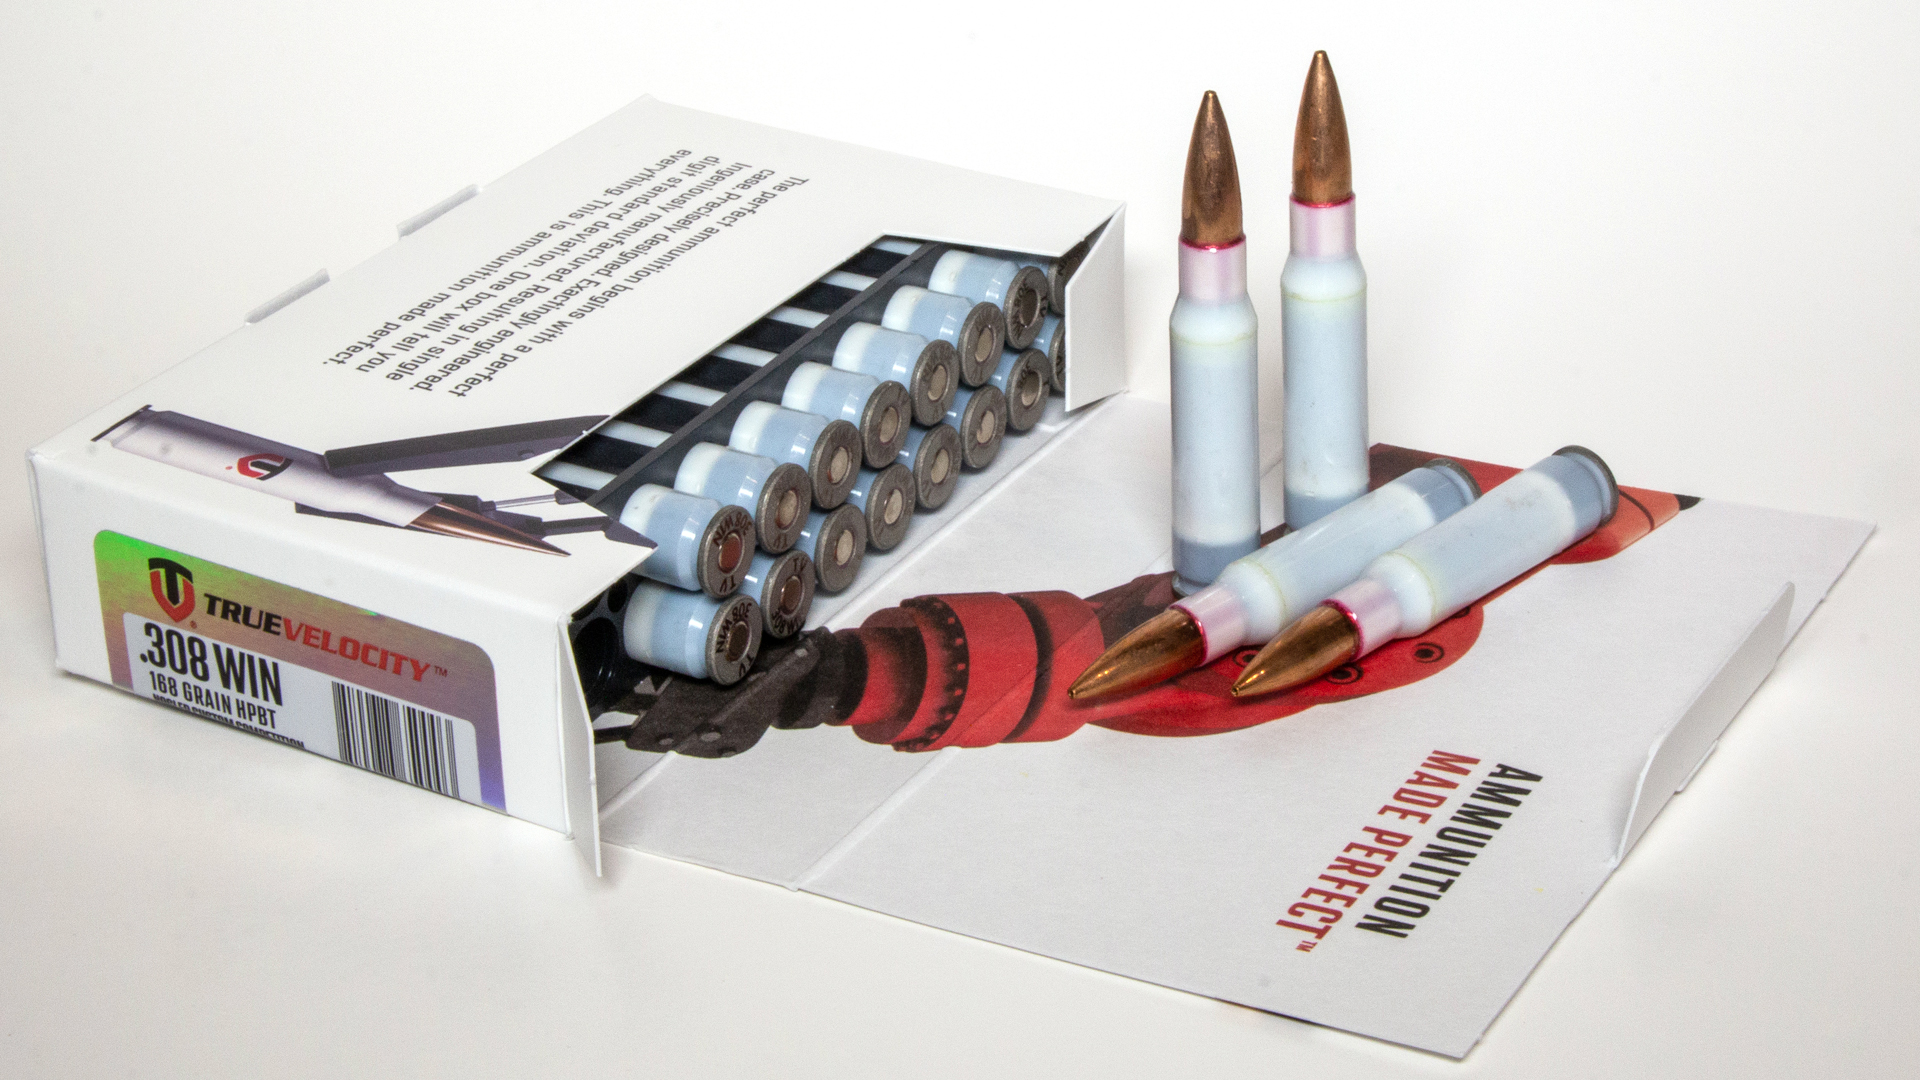 Bullet Grain: What It Means and Why It's Important - The Shooter's Log